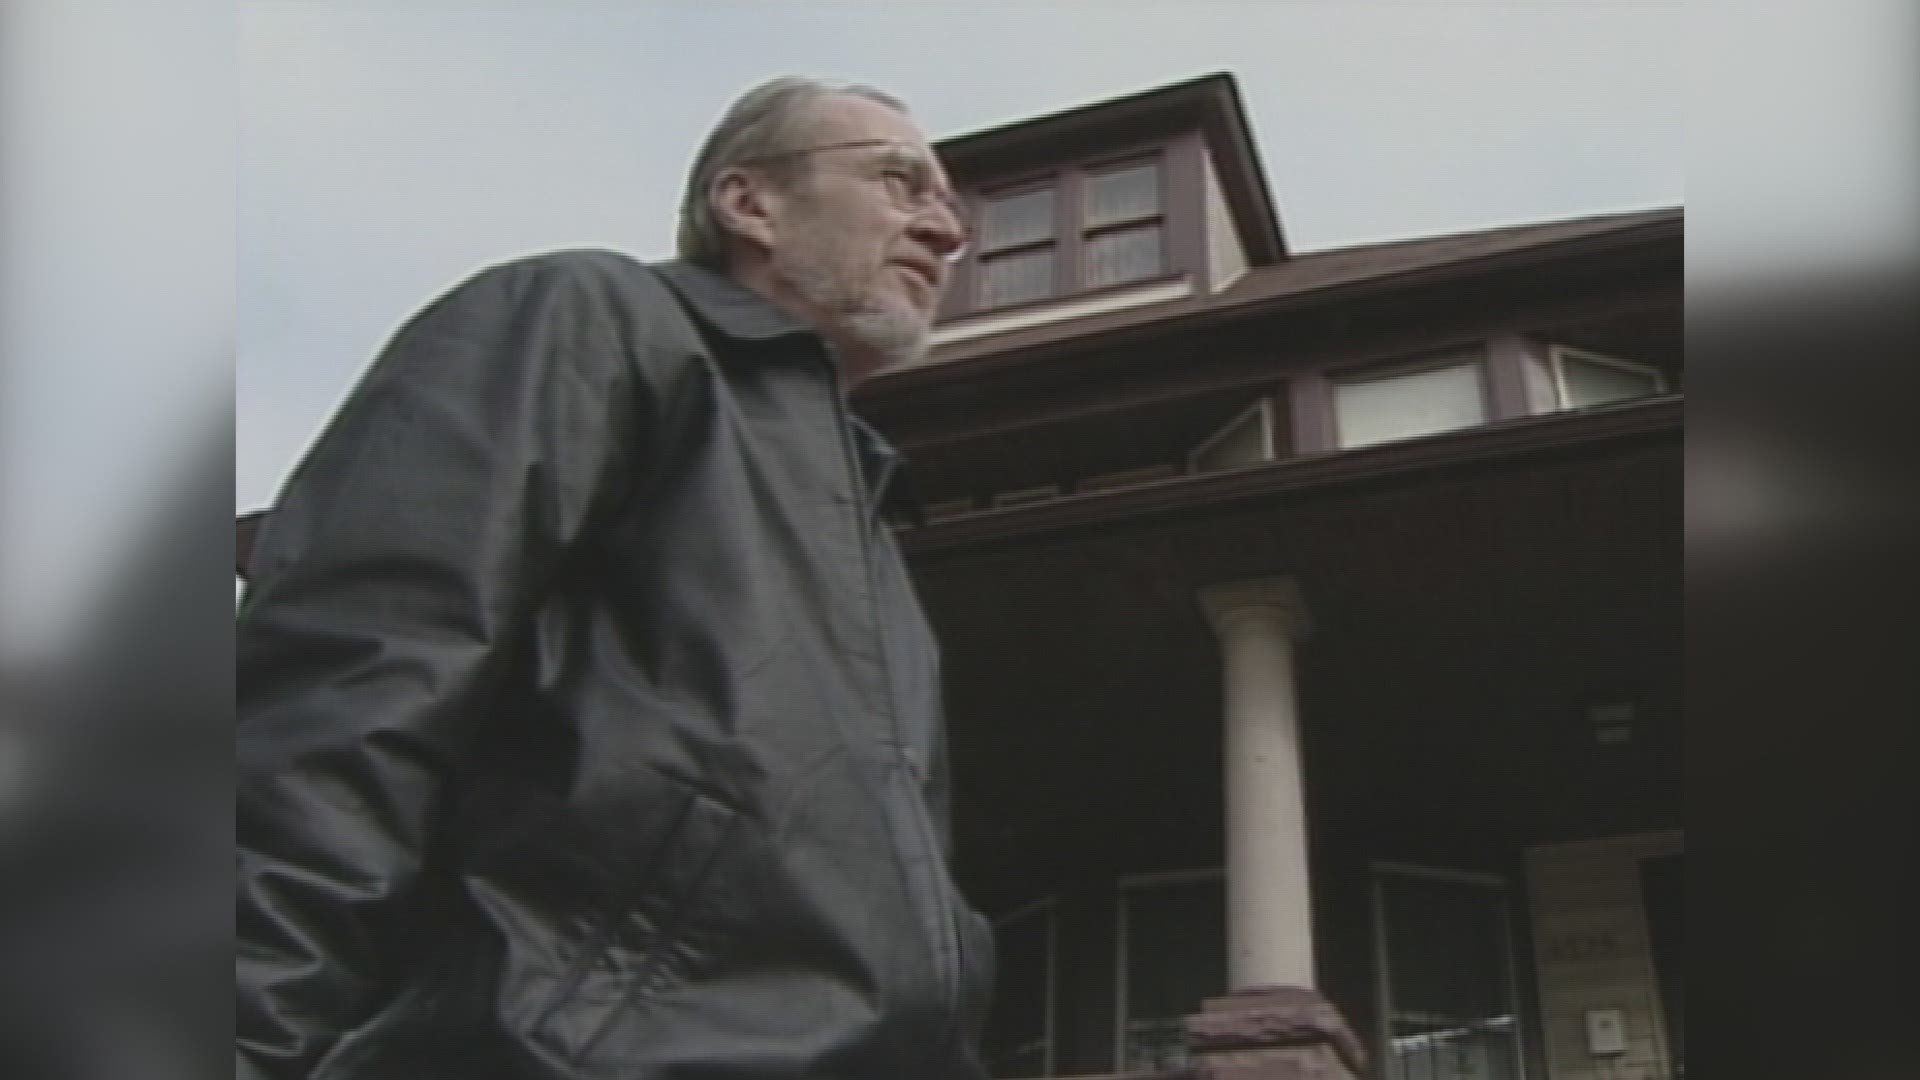 Footage from November 2000: Horror icon Wes Craven takes WKYC on a tour of his childhood roots in Cleveland where he many elements inspired the infamous Freddy Krueger villain.